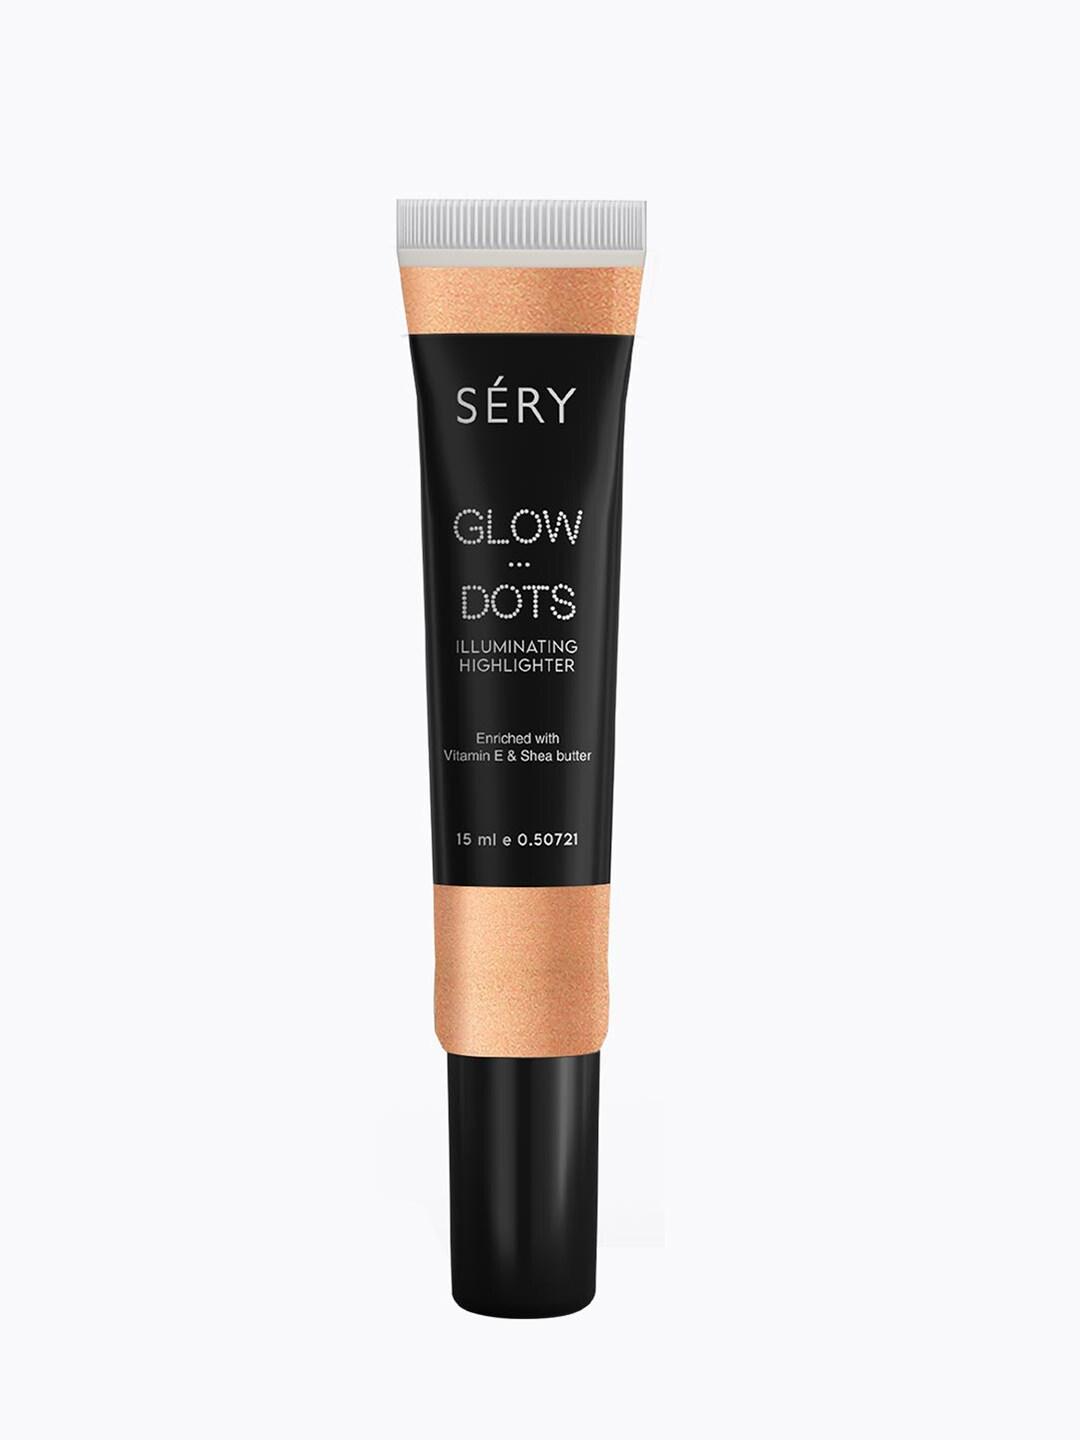 SERY Glow Dots Smudge-Proof Illuminating Highlighter with Vitamin E 15ml - Champagne